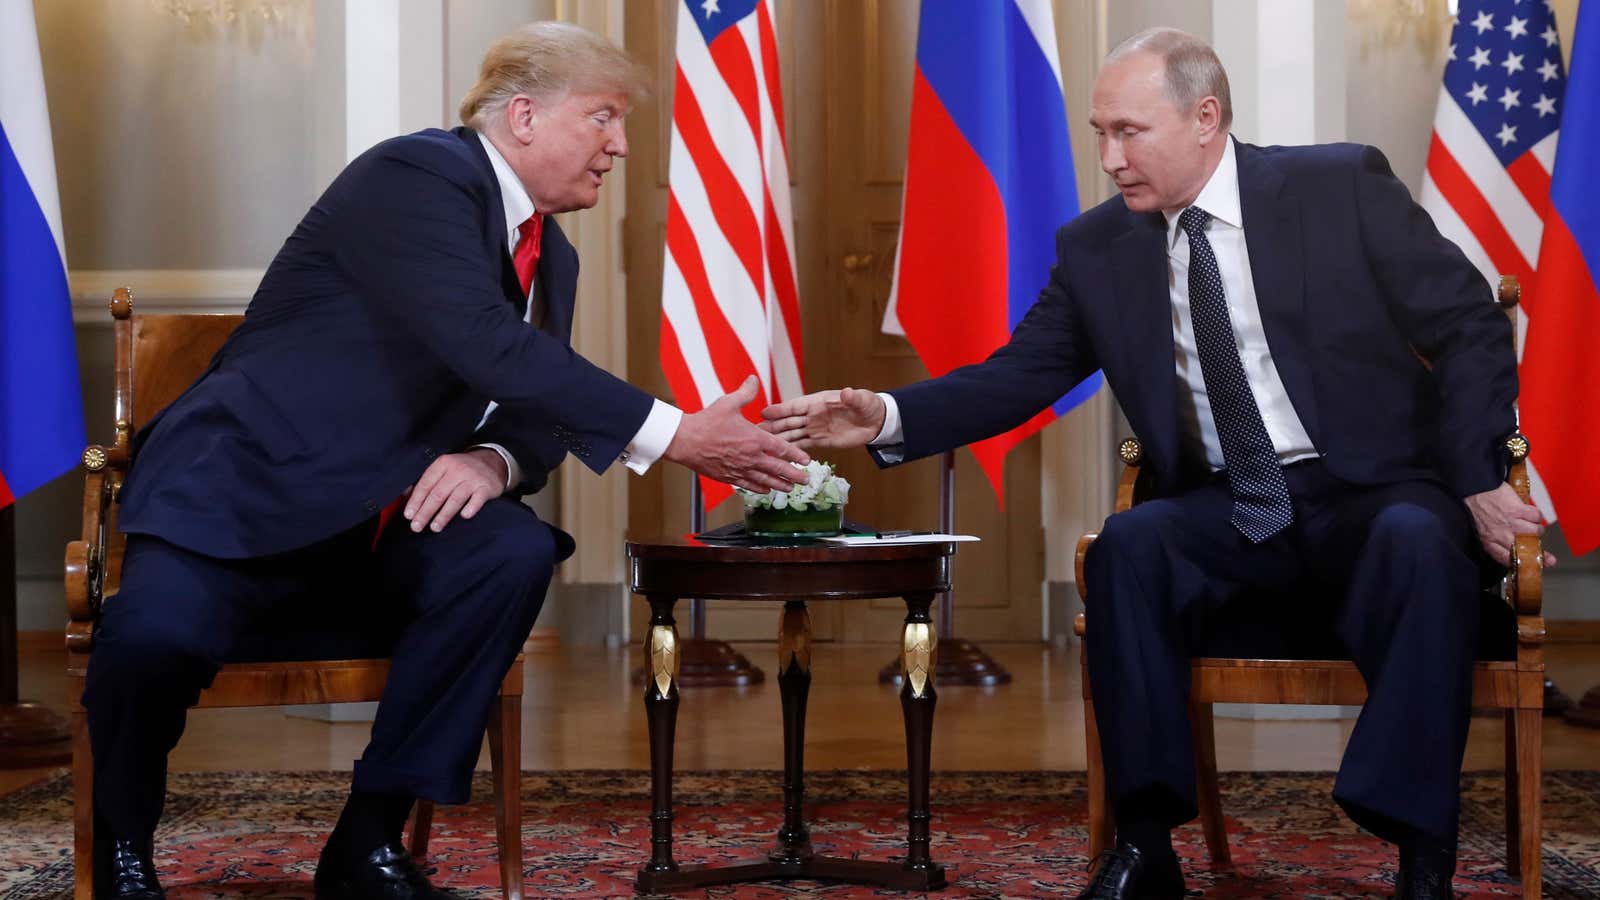 The handshake was a victory in itself for Putin.